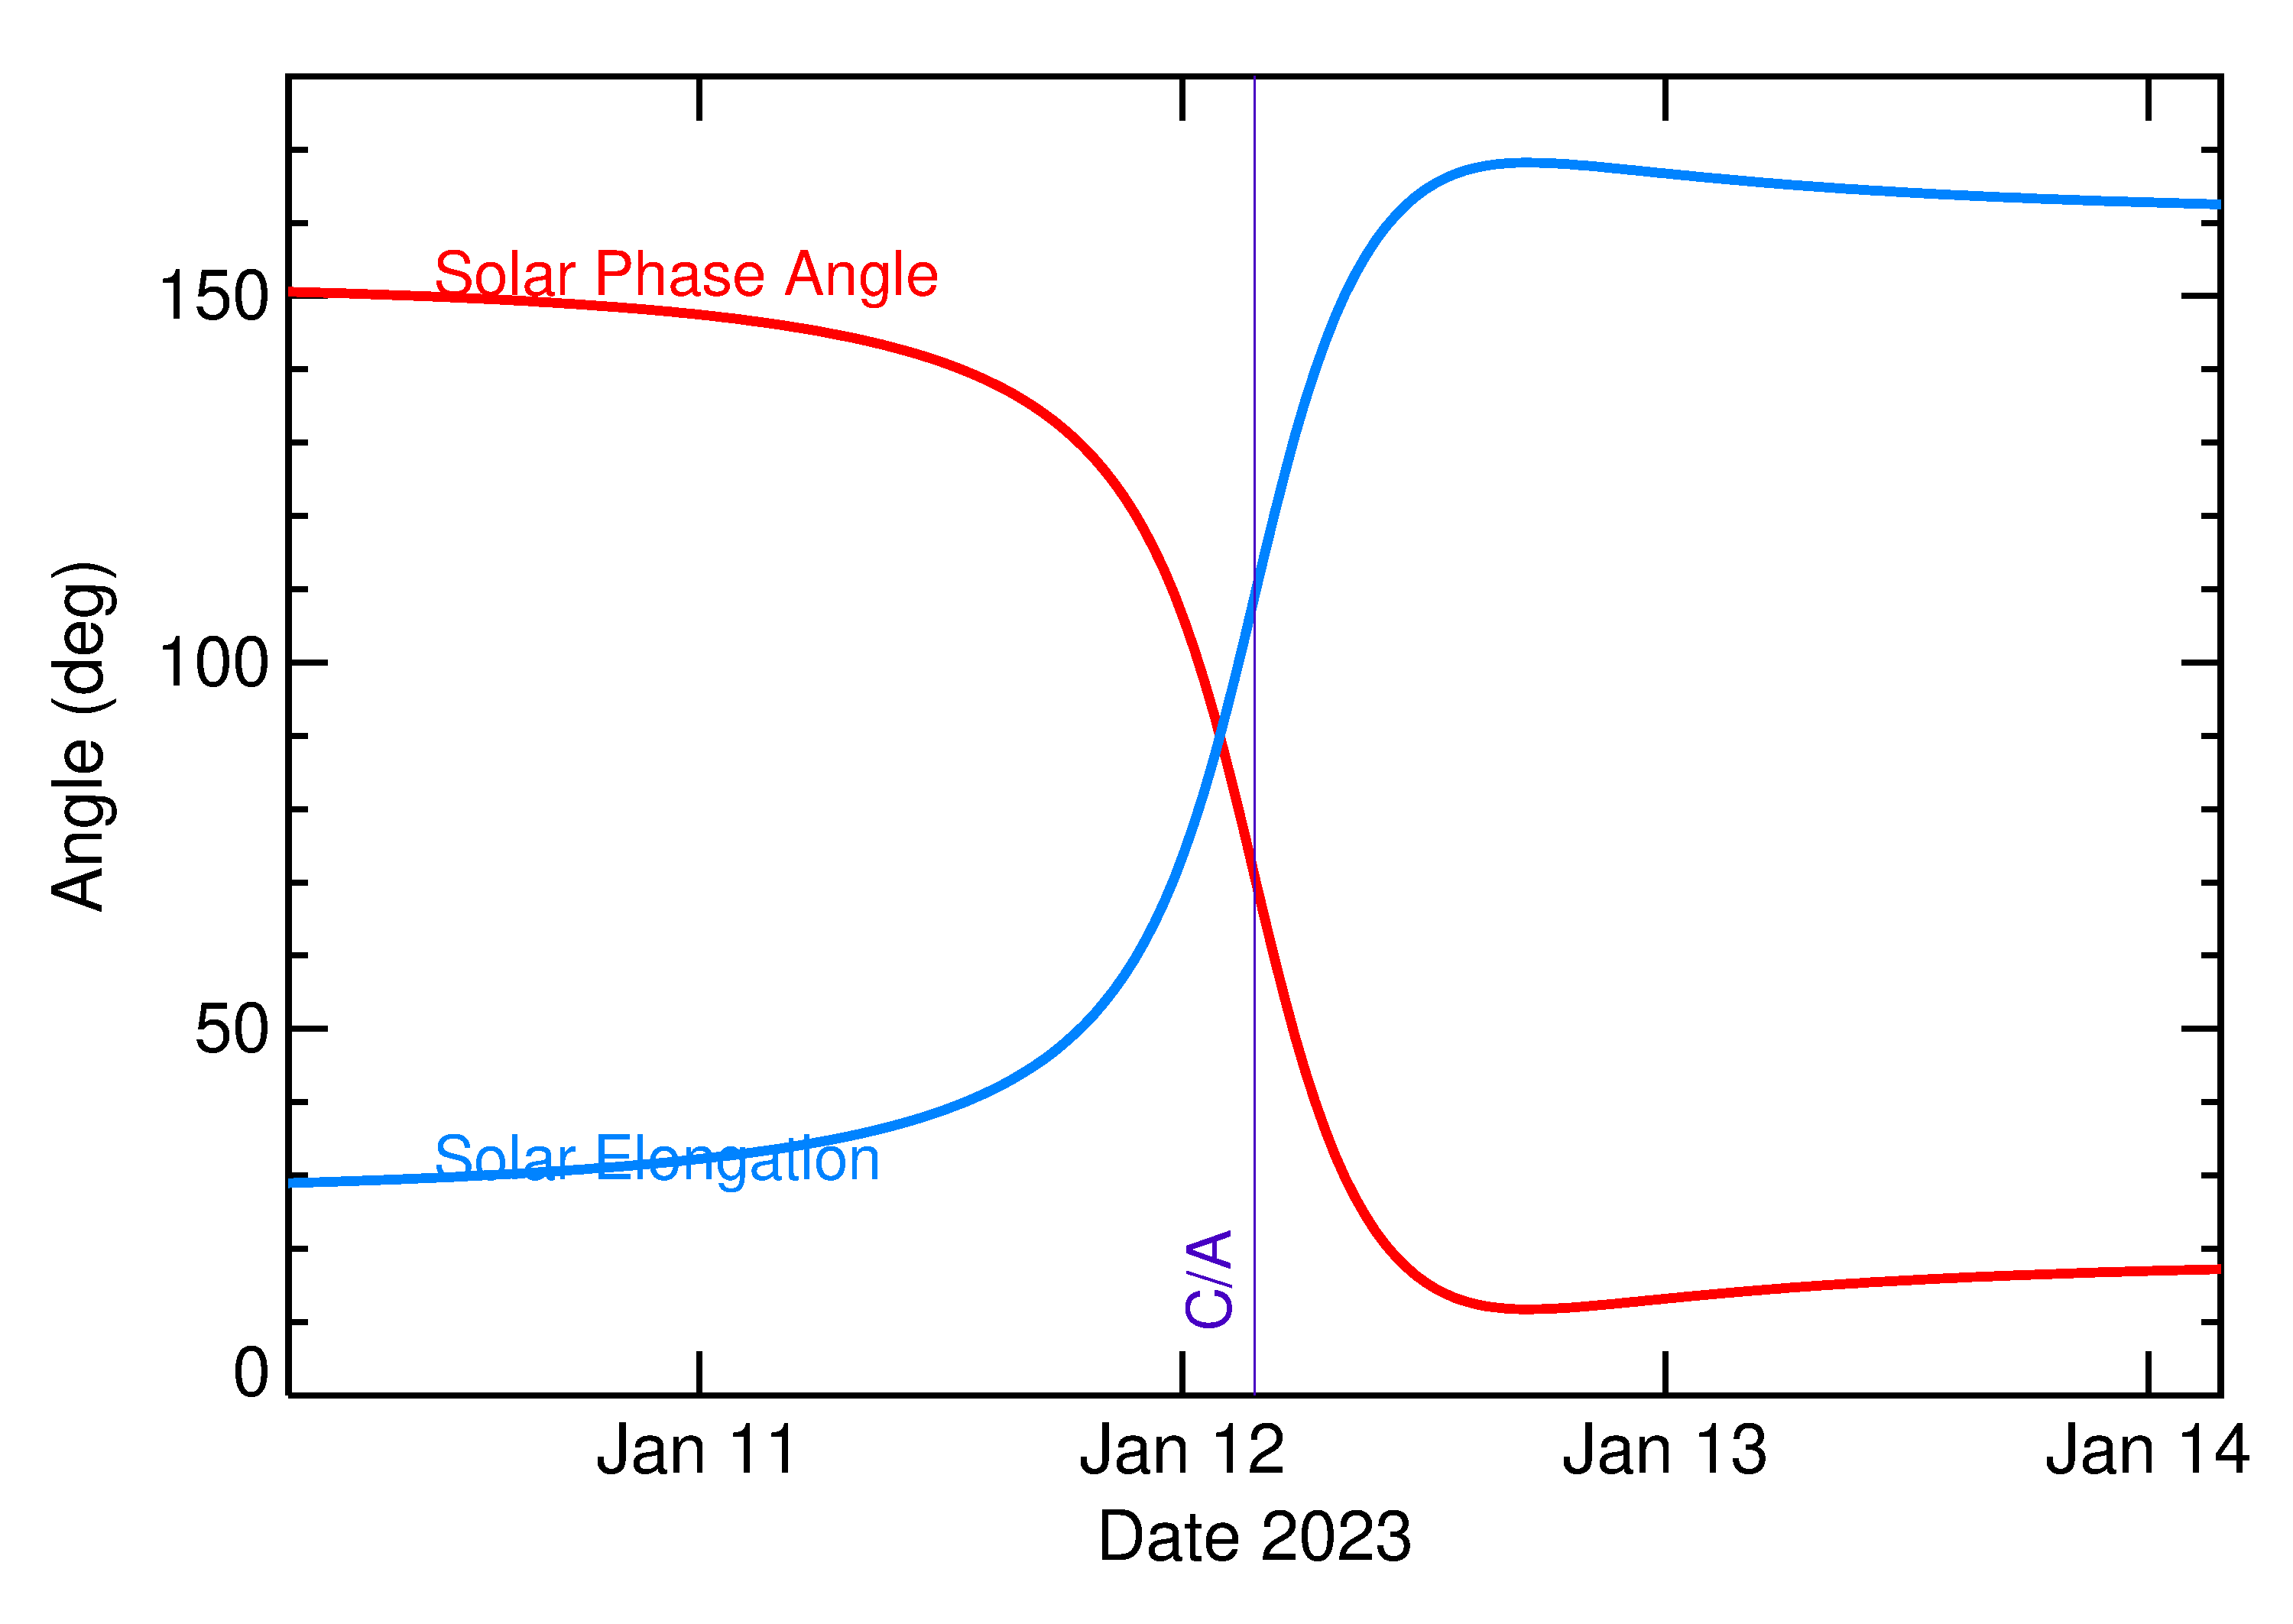 Solar Elongation and Solar Phase Angle of 2023 AC1 in the days around closest approach